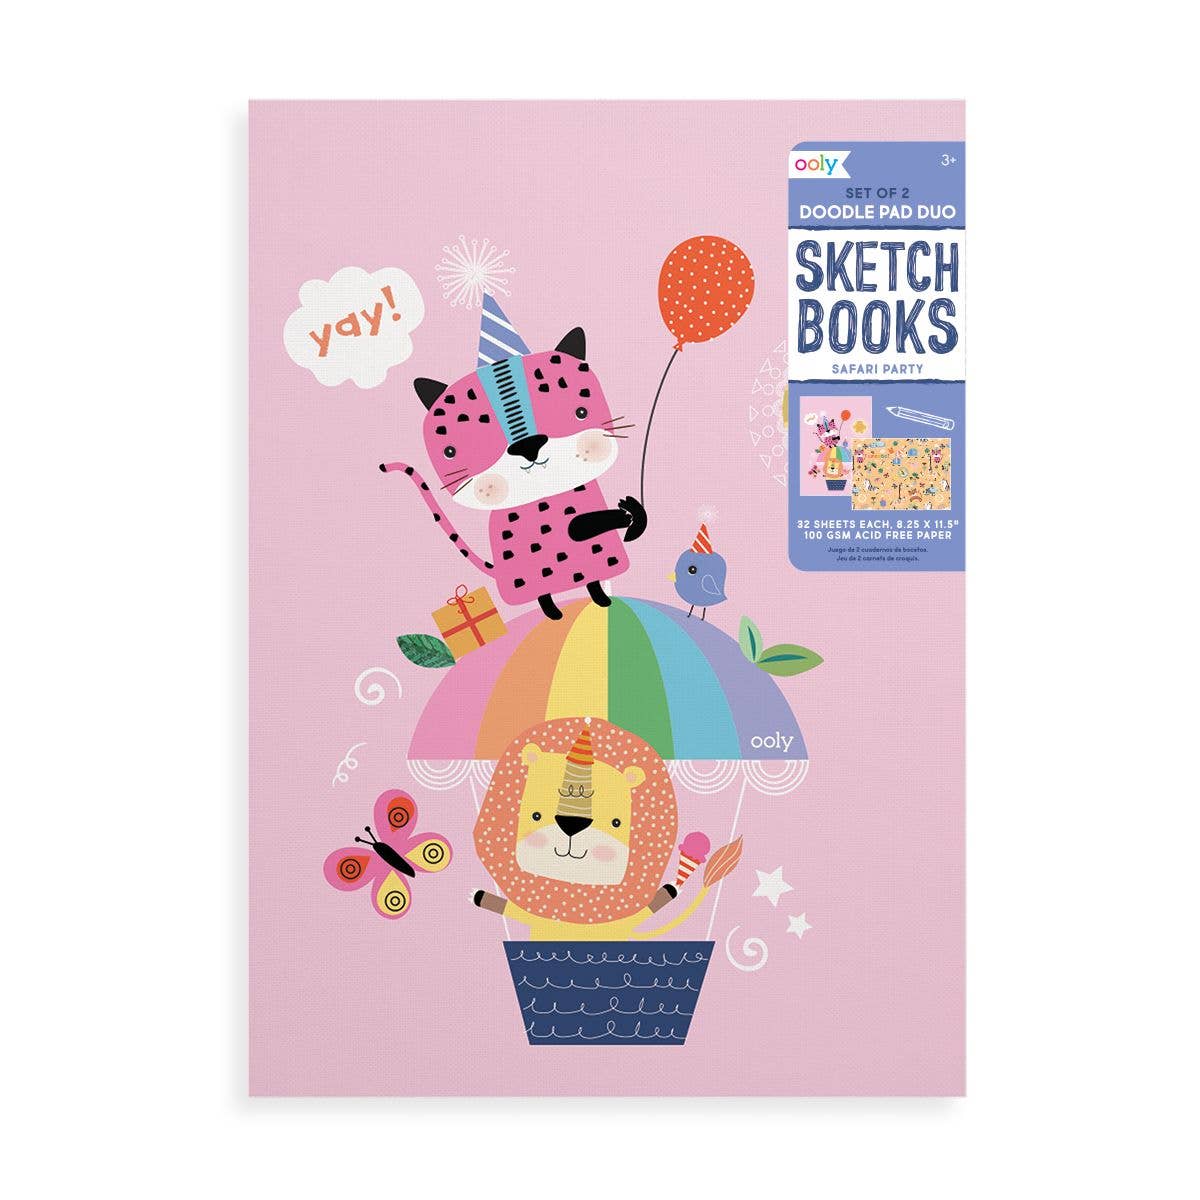 Doodle Pad Duo Sketchbook Set of 2 Softcover, OOLY